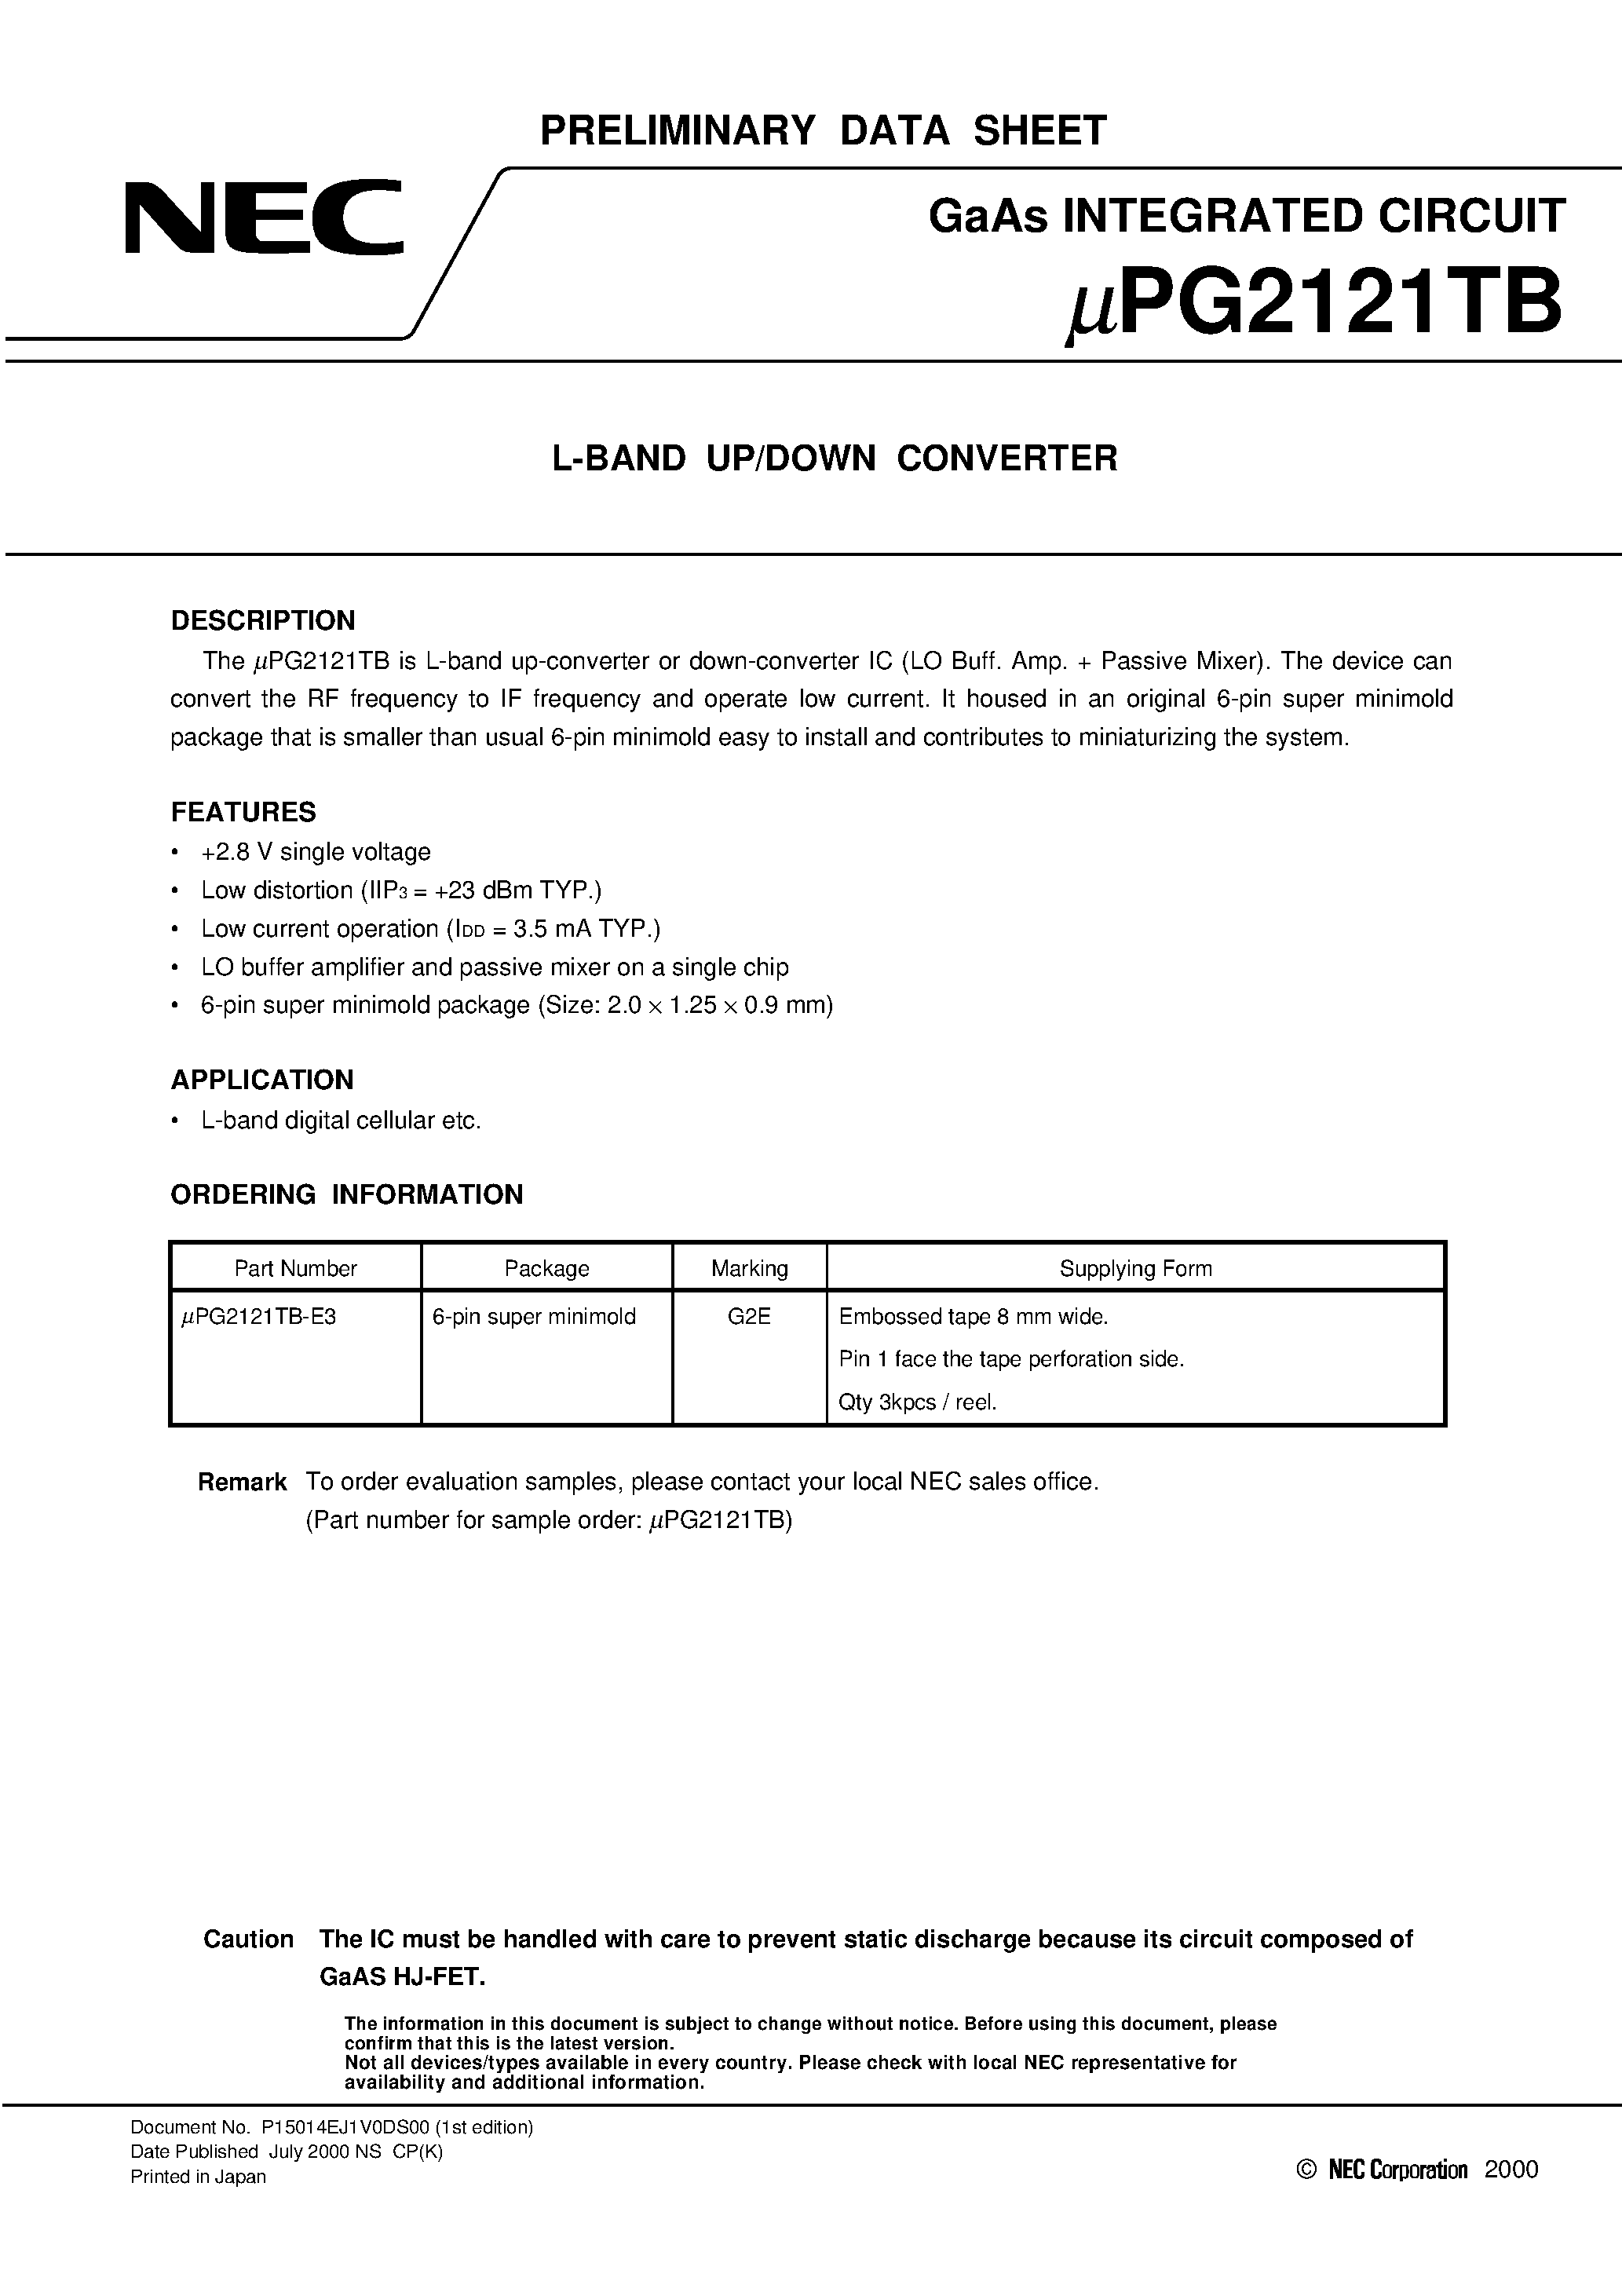 Datasheet UPG2121TB - L-BAND UP/DOWN CONVERTER page 1